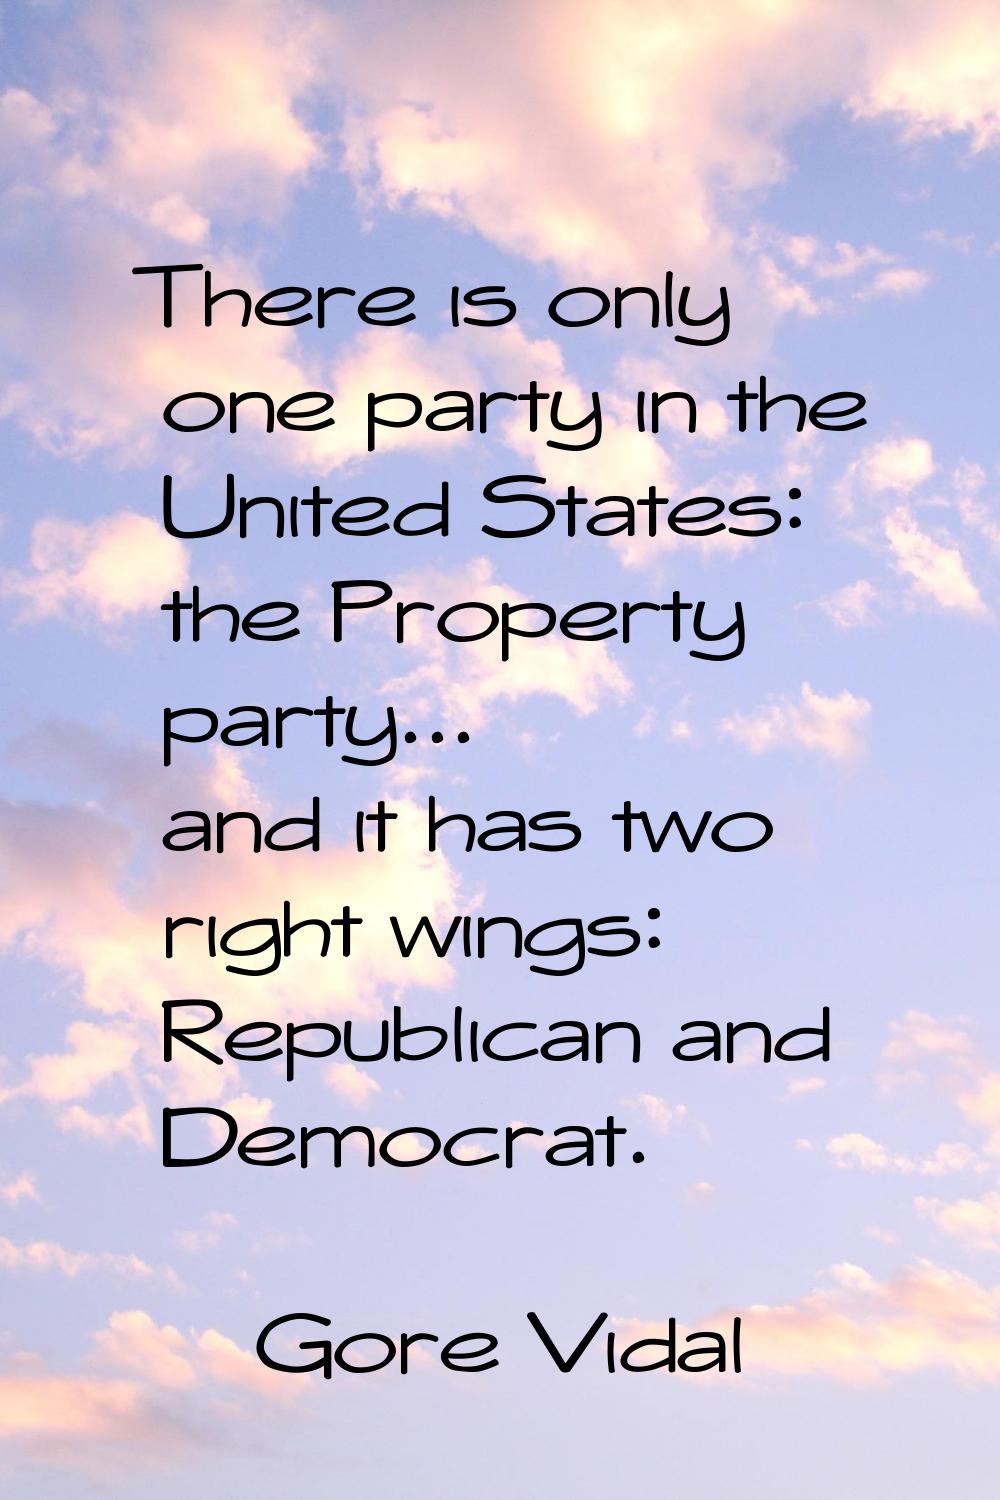 There is only one party in the United States: the Property party... and it has two right wings: Rep